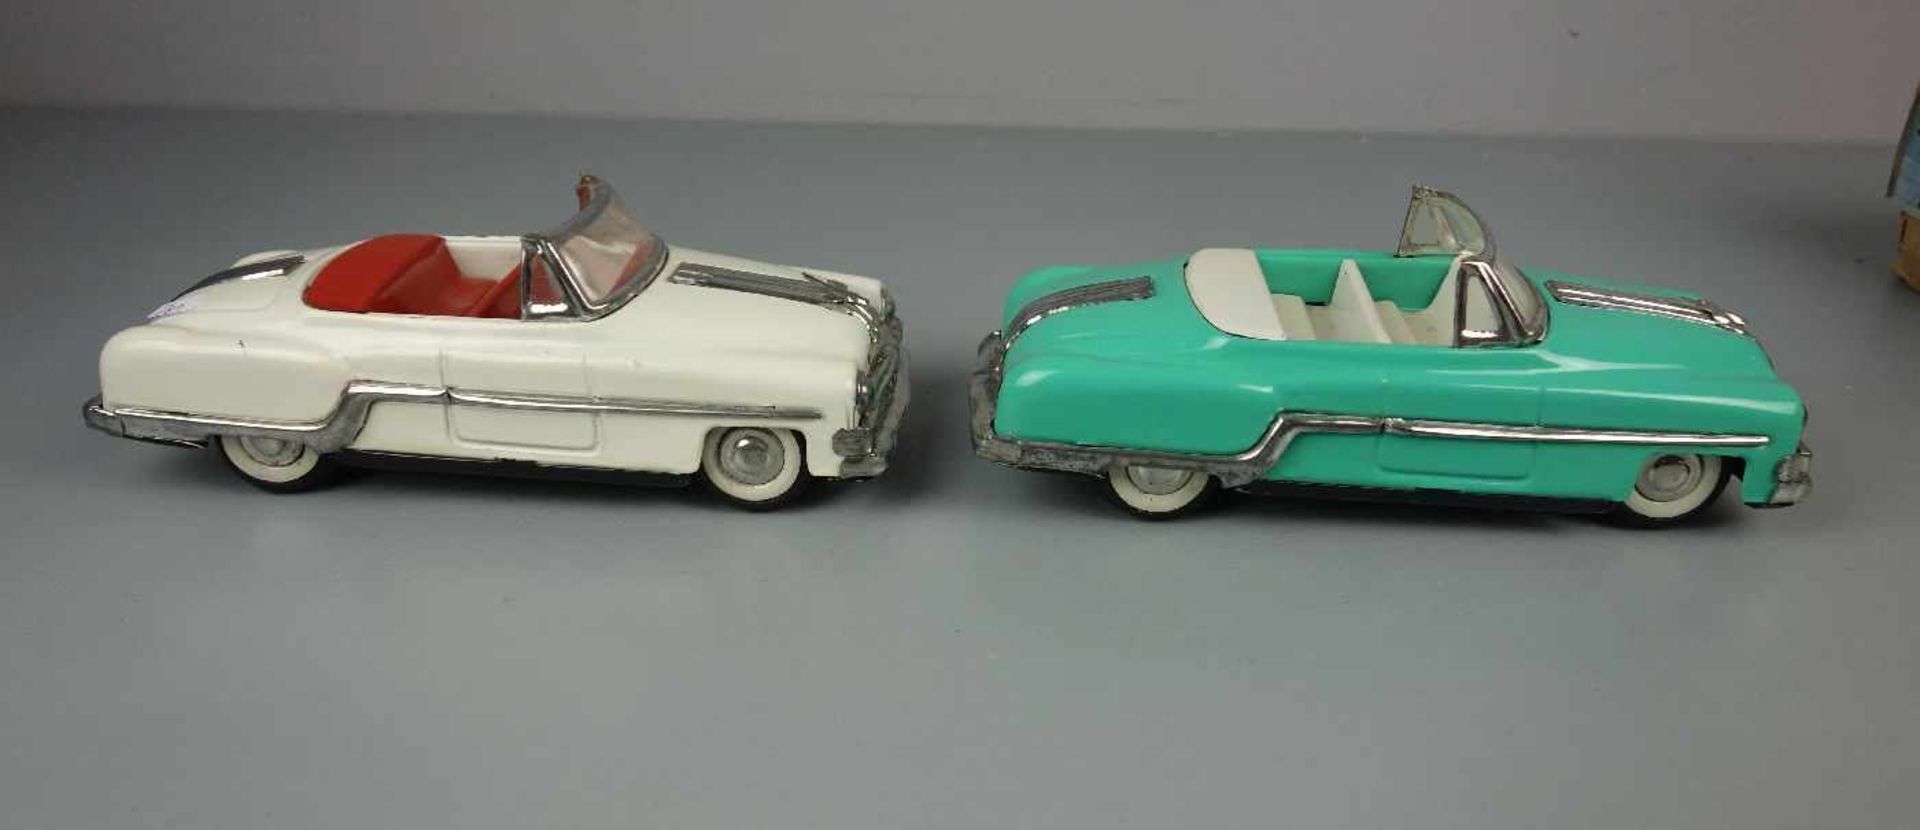 BLECHSPIELZEUG / FAHRZEUGE: 2 AUTOS - MINISTER - OPEN DELUXE / two tin toy cars, Mitte 20. Jh., - Image 4 of 7